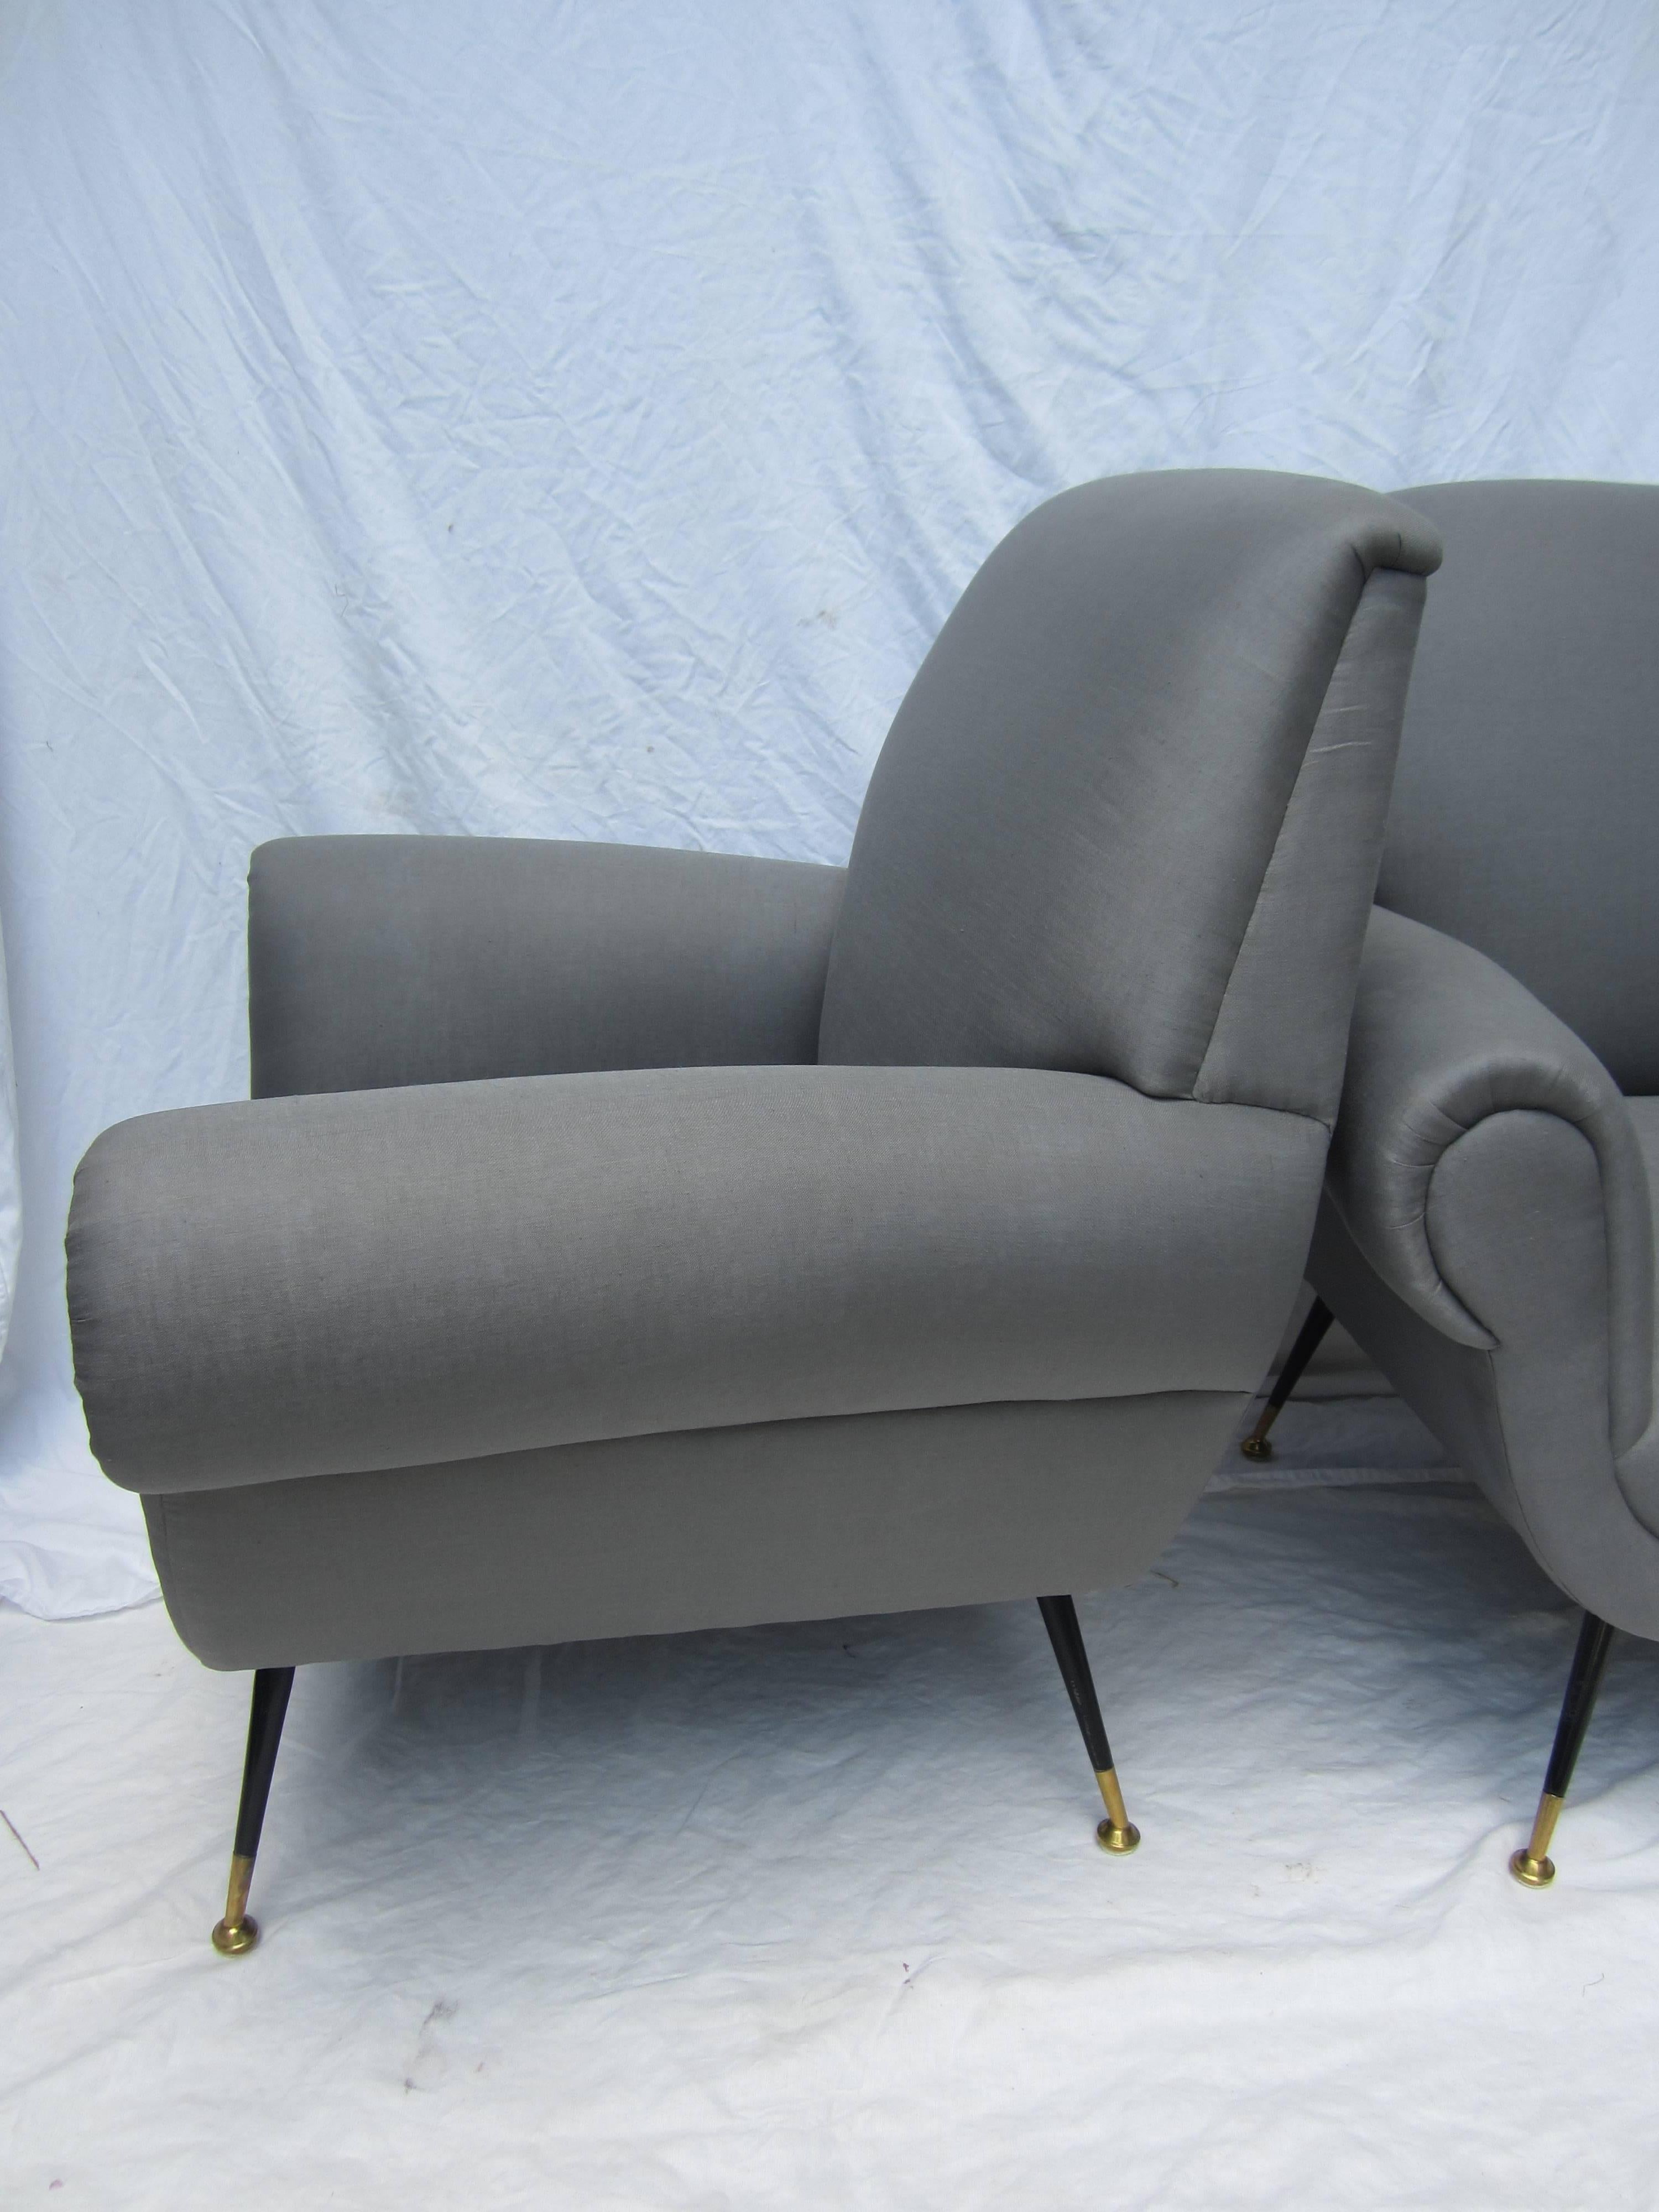 Pair of Italian arm chairs by Gigi Radice for Minotti newly upholstered in gray linen.....steel and brass legs.